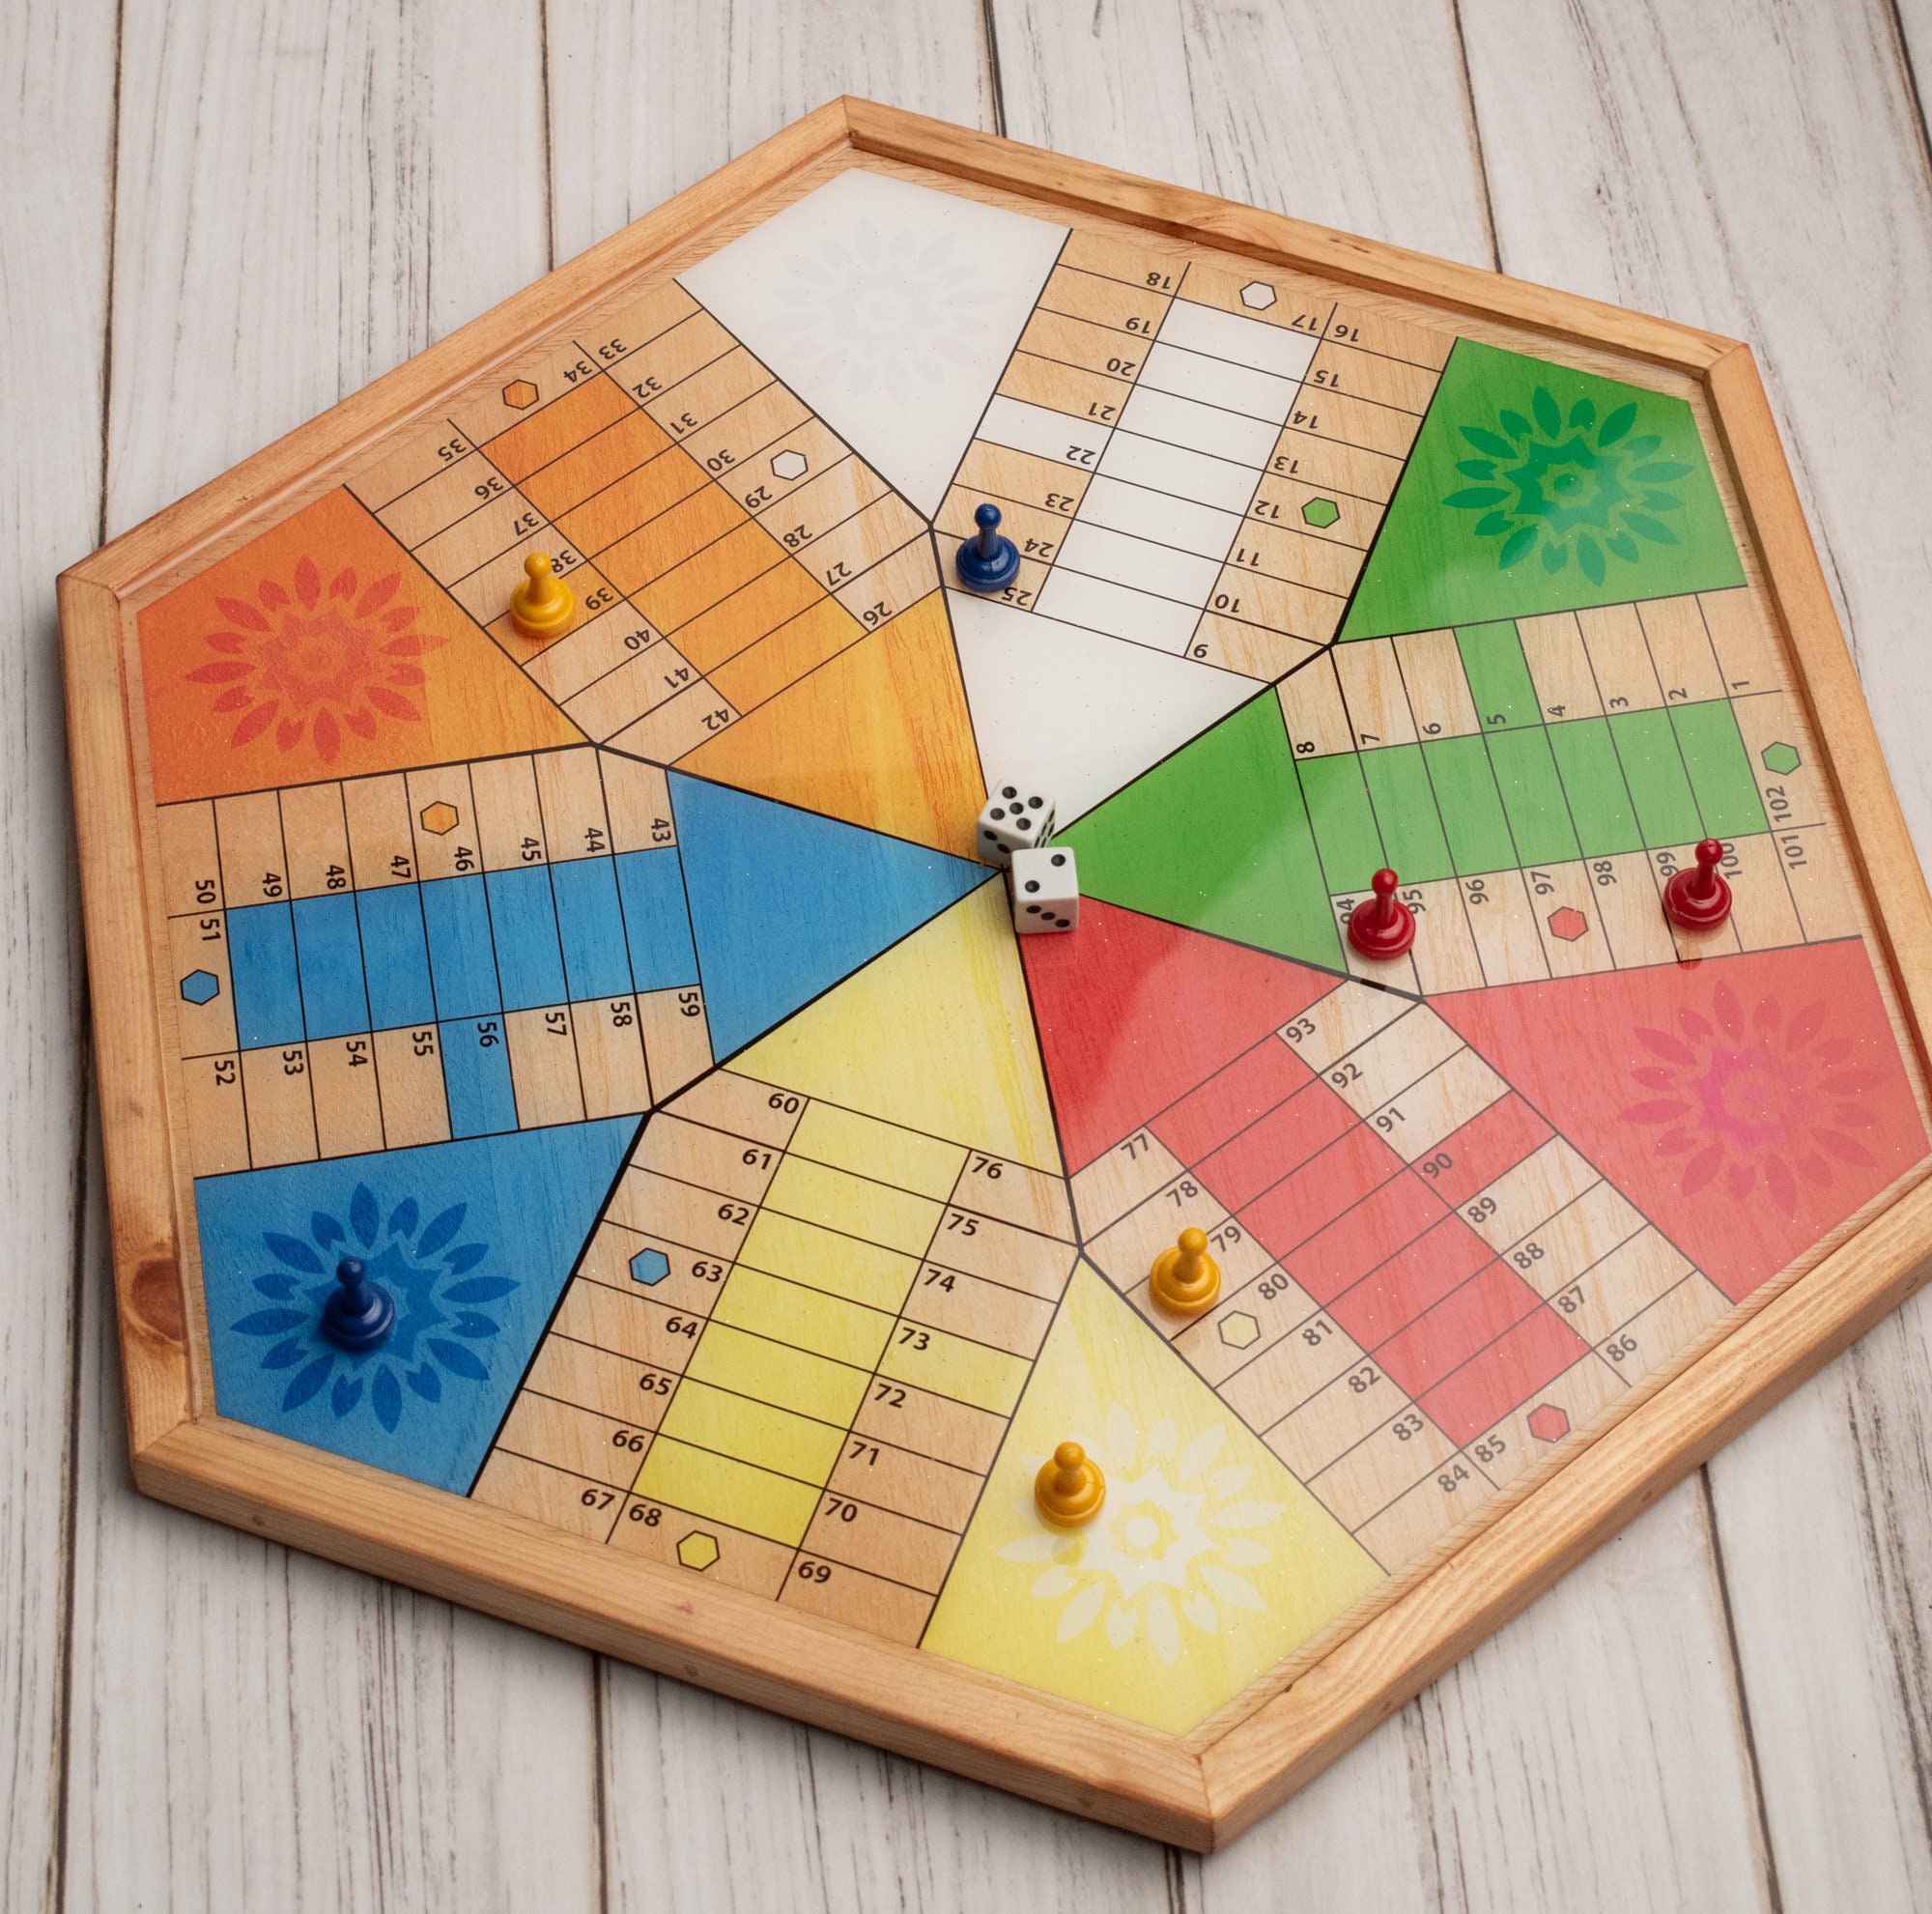 Parchis Board 2 in 1 Parques and chedre and Oca games traditional and  classic Family Club